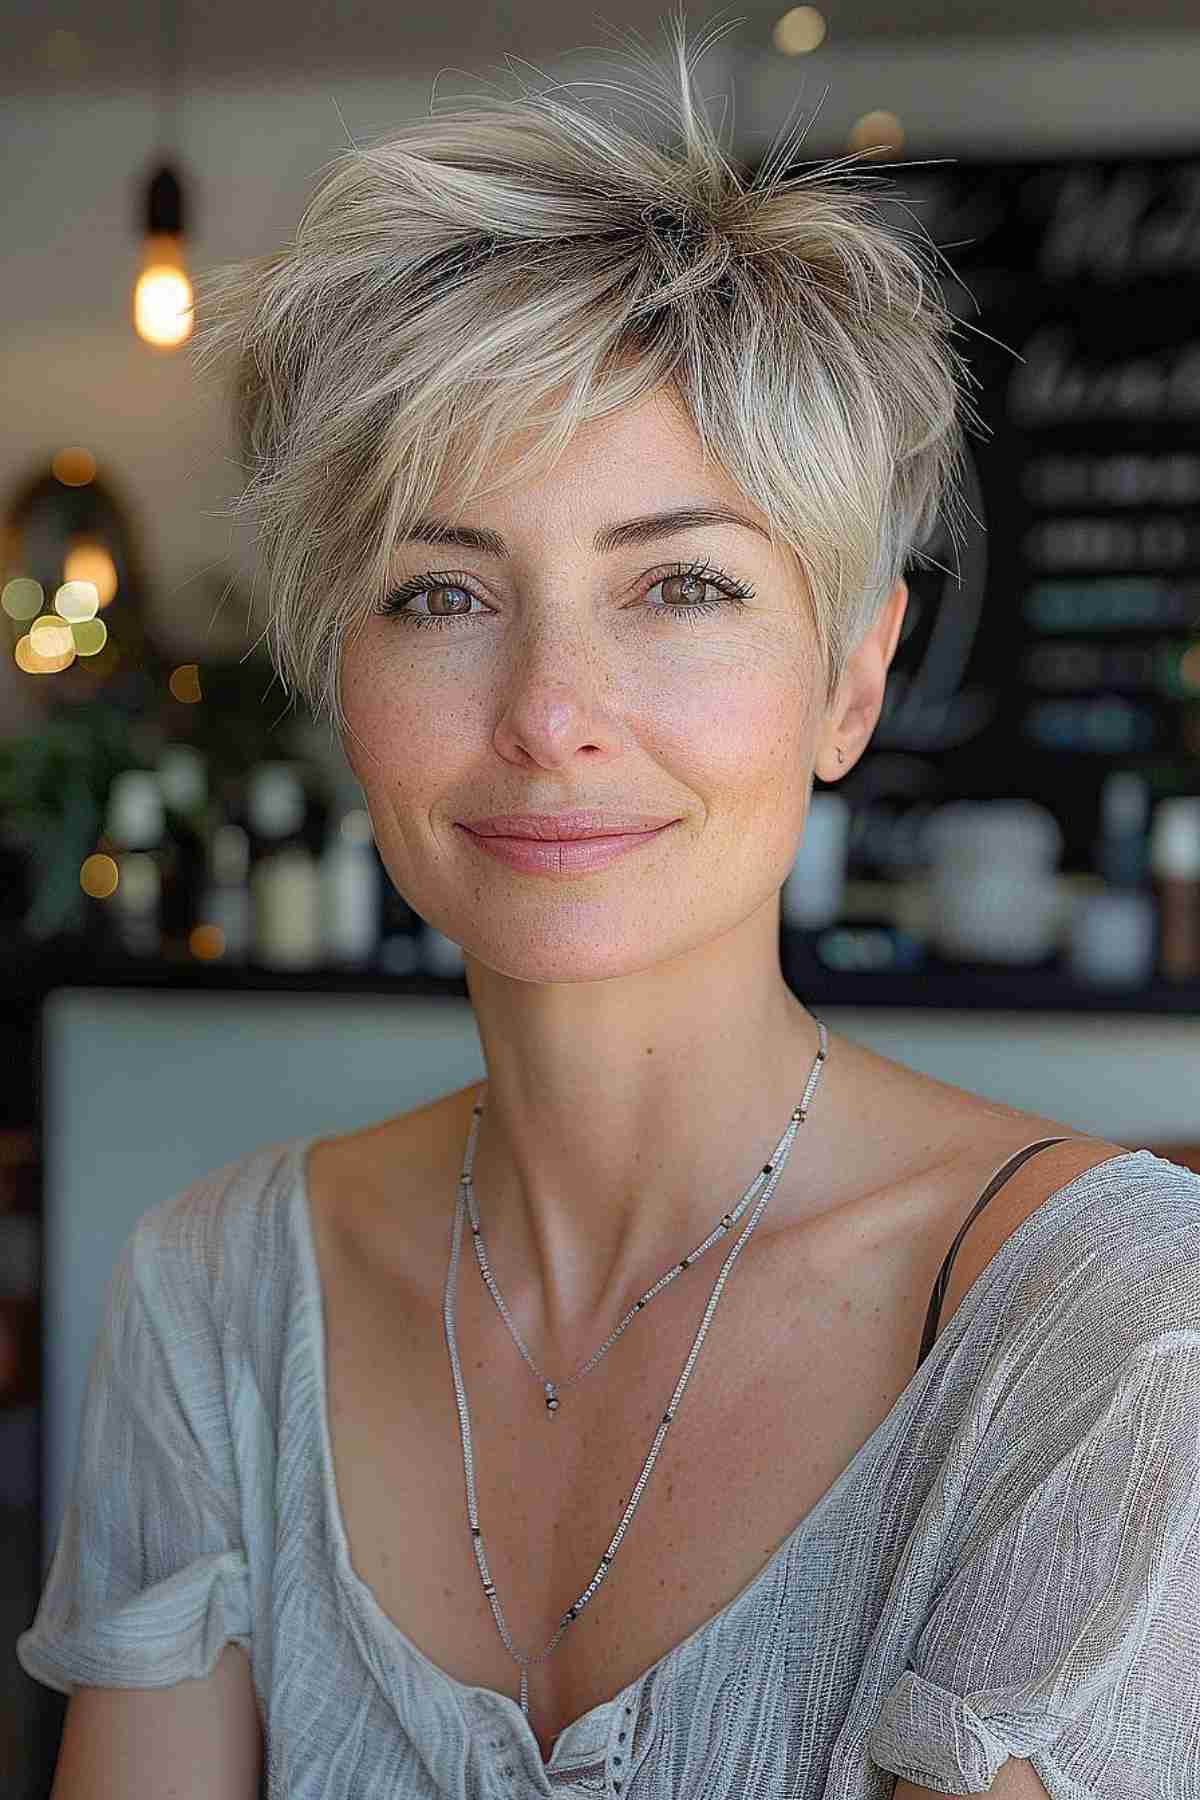 Textured short platinum blonde haircut flattering for oval face shapes, ideal for women over 40